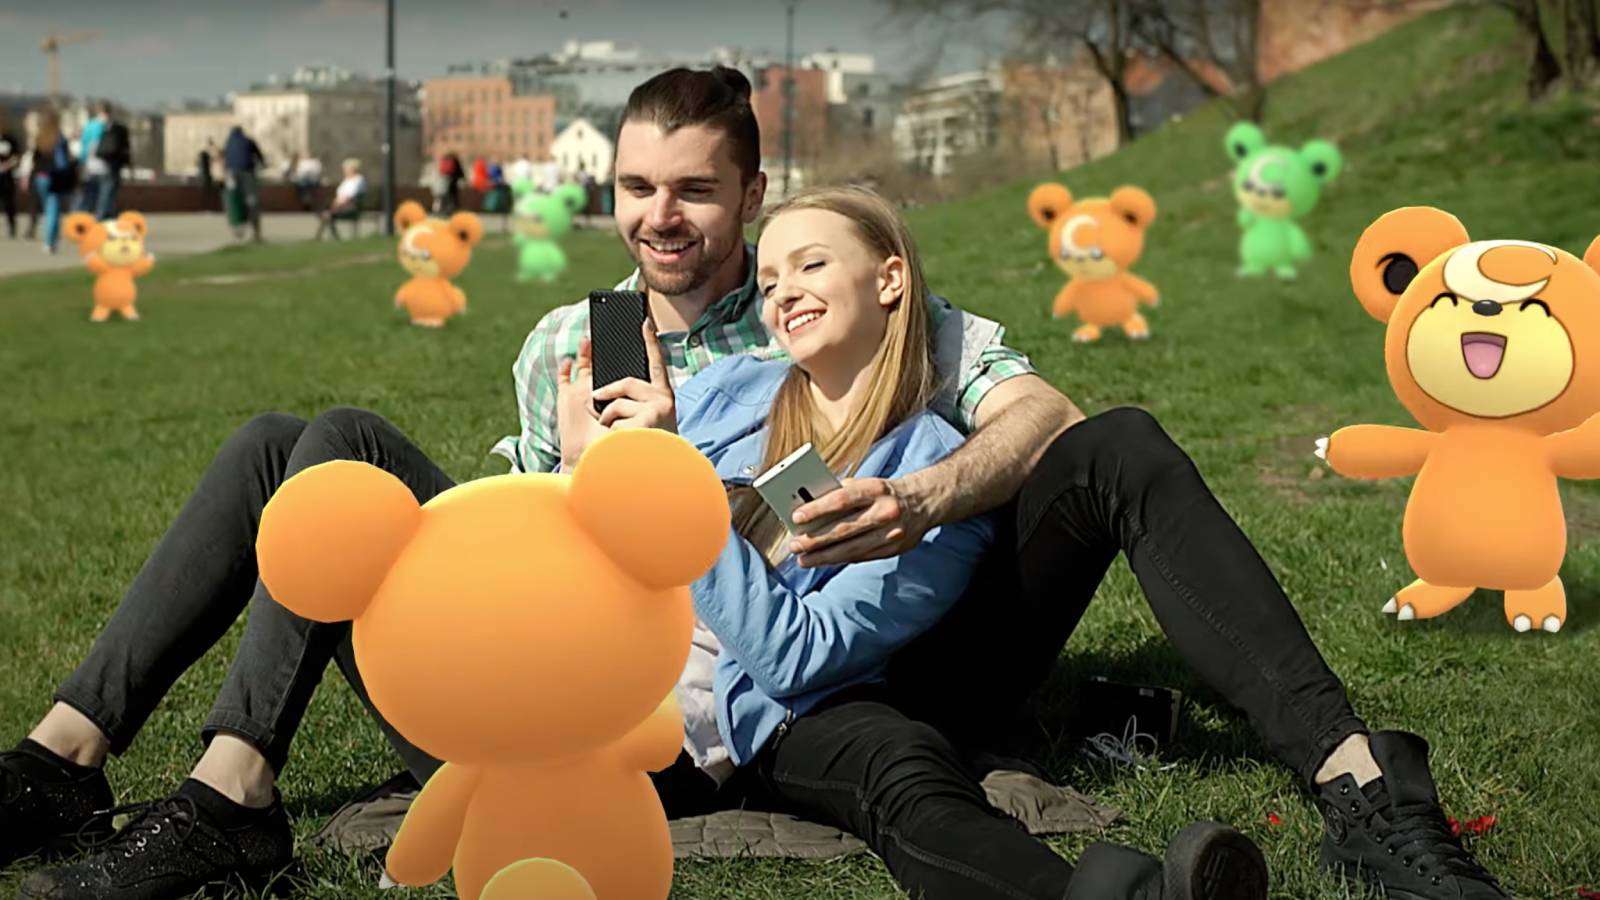 Two Pokemon Go players sit in the grass, while Teddiursa appear around them, both regular and Shiny Pokemon